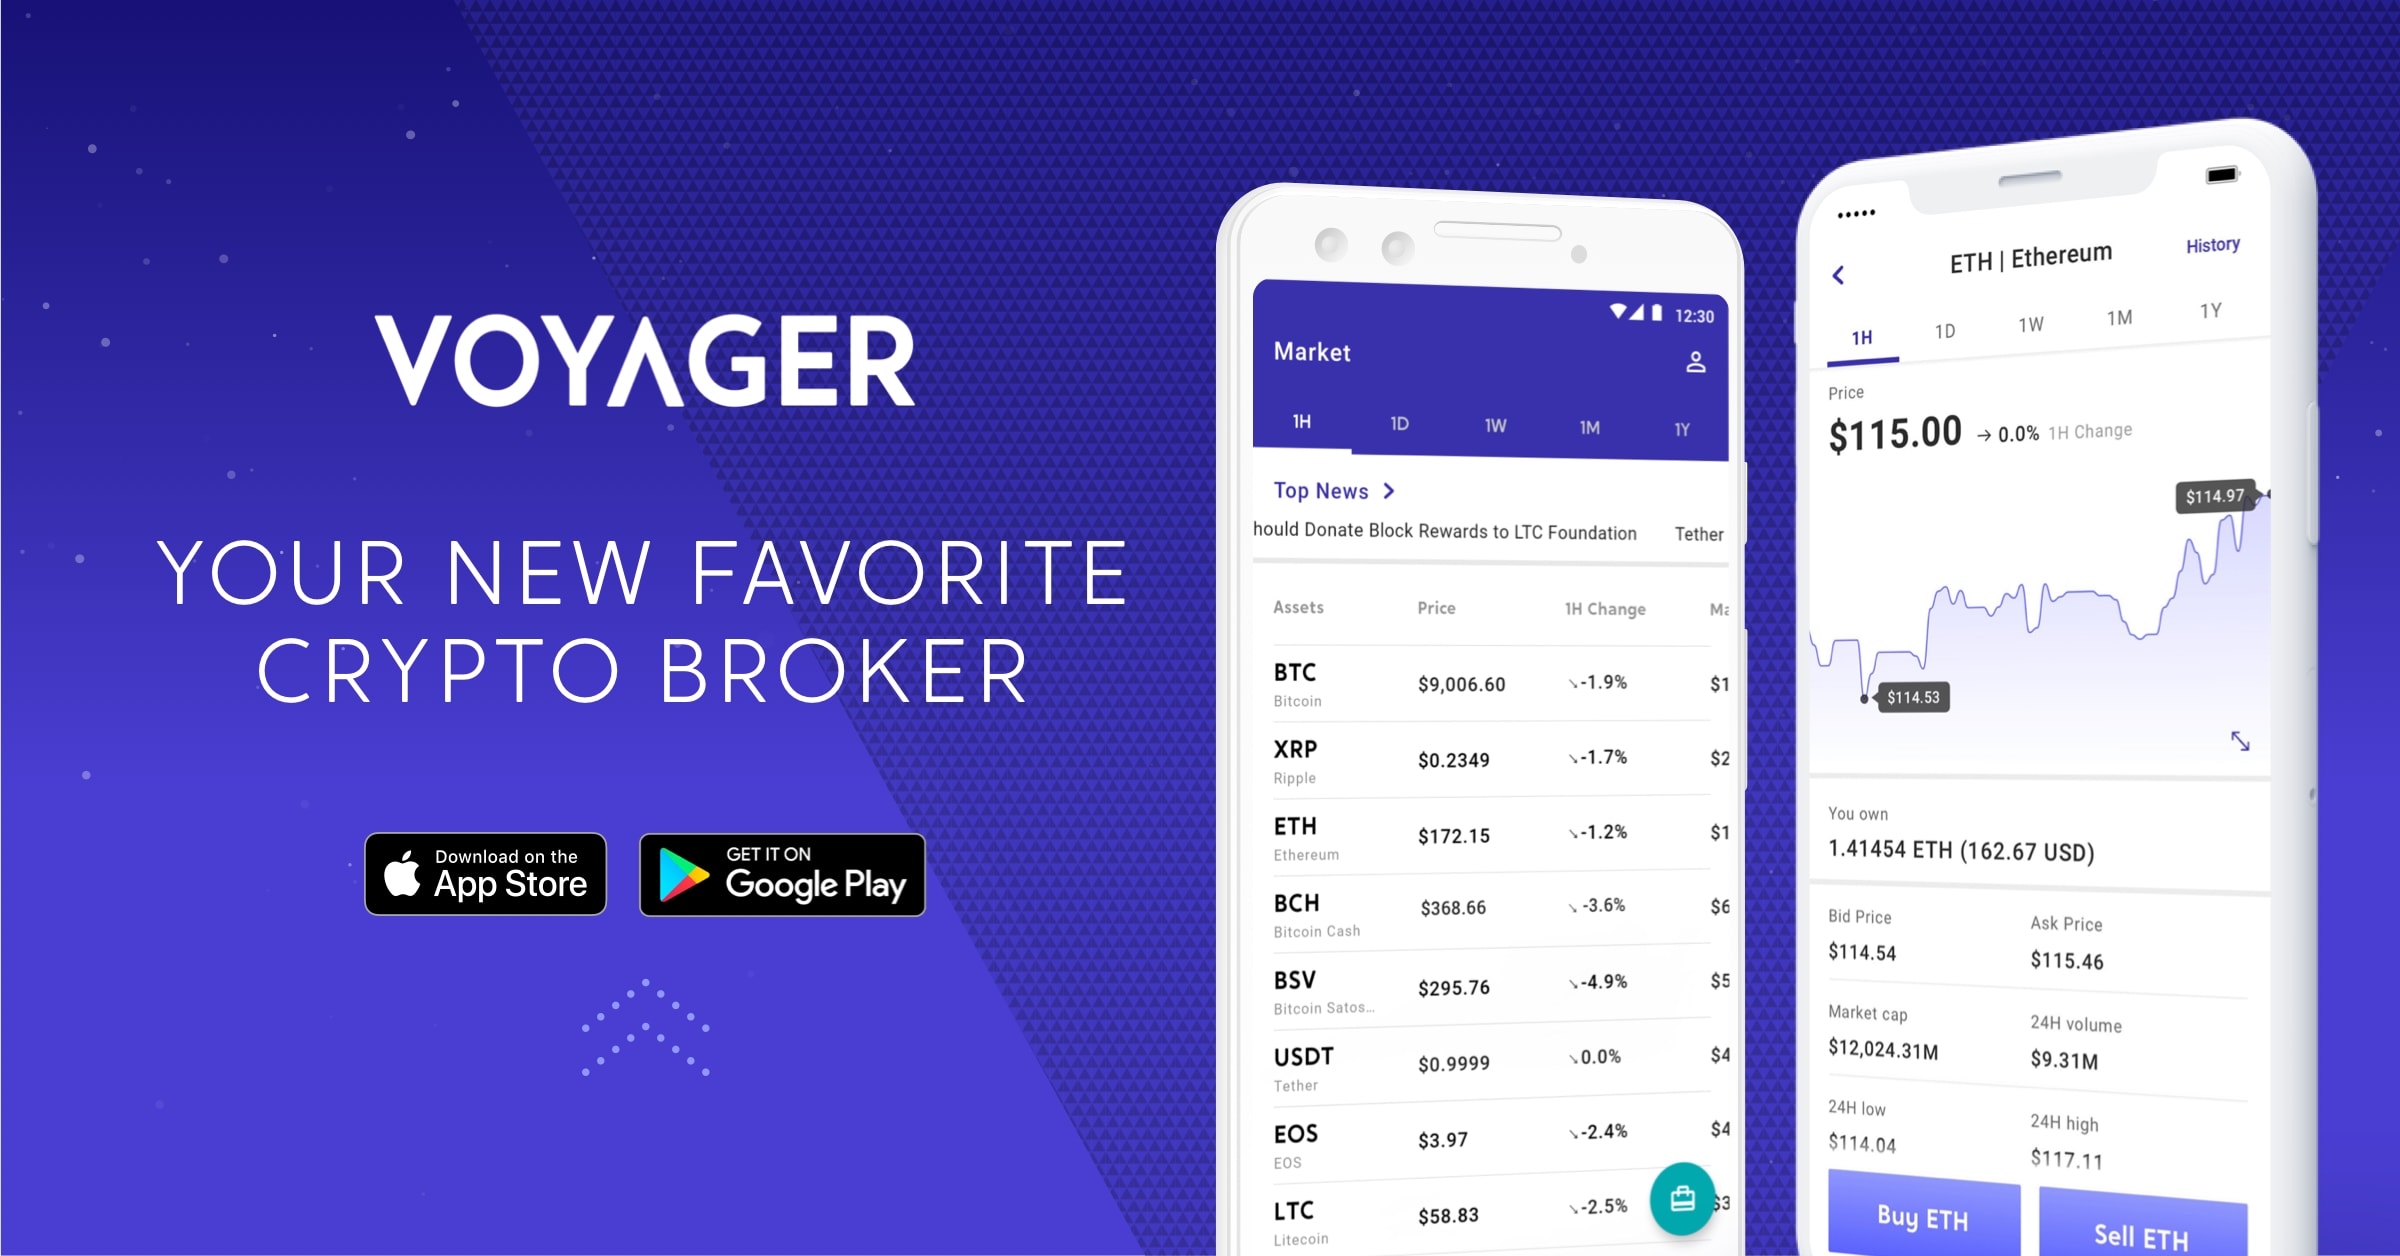 VYGR's Voyager Token Up 20.42% Today! | National Inflation ...